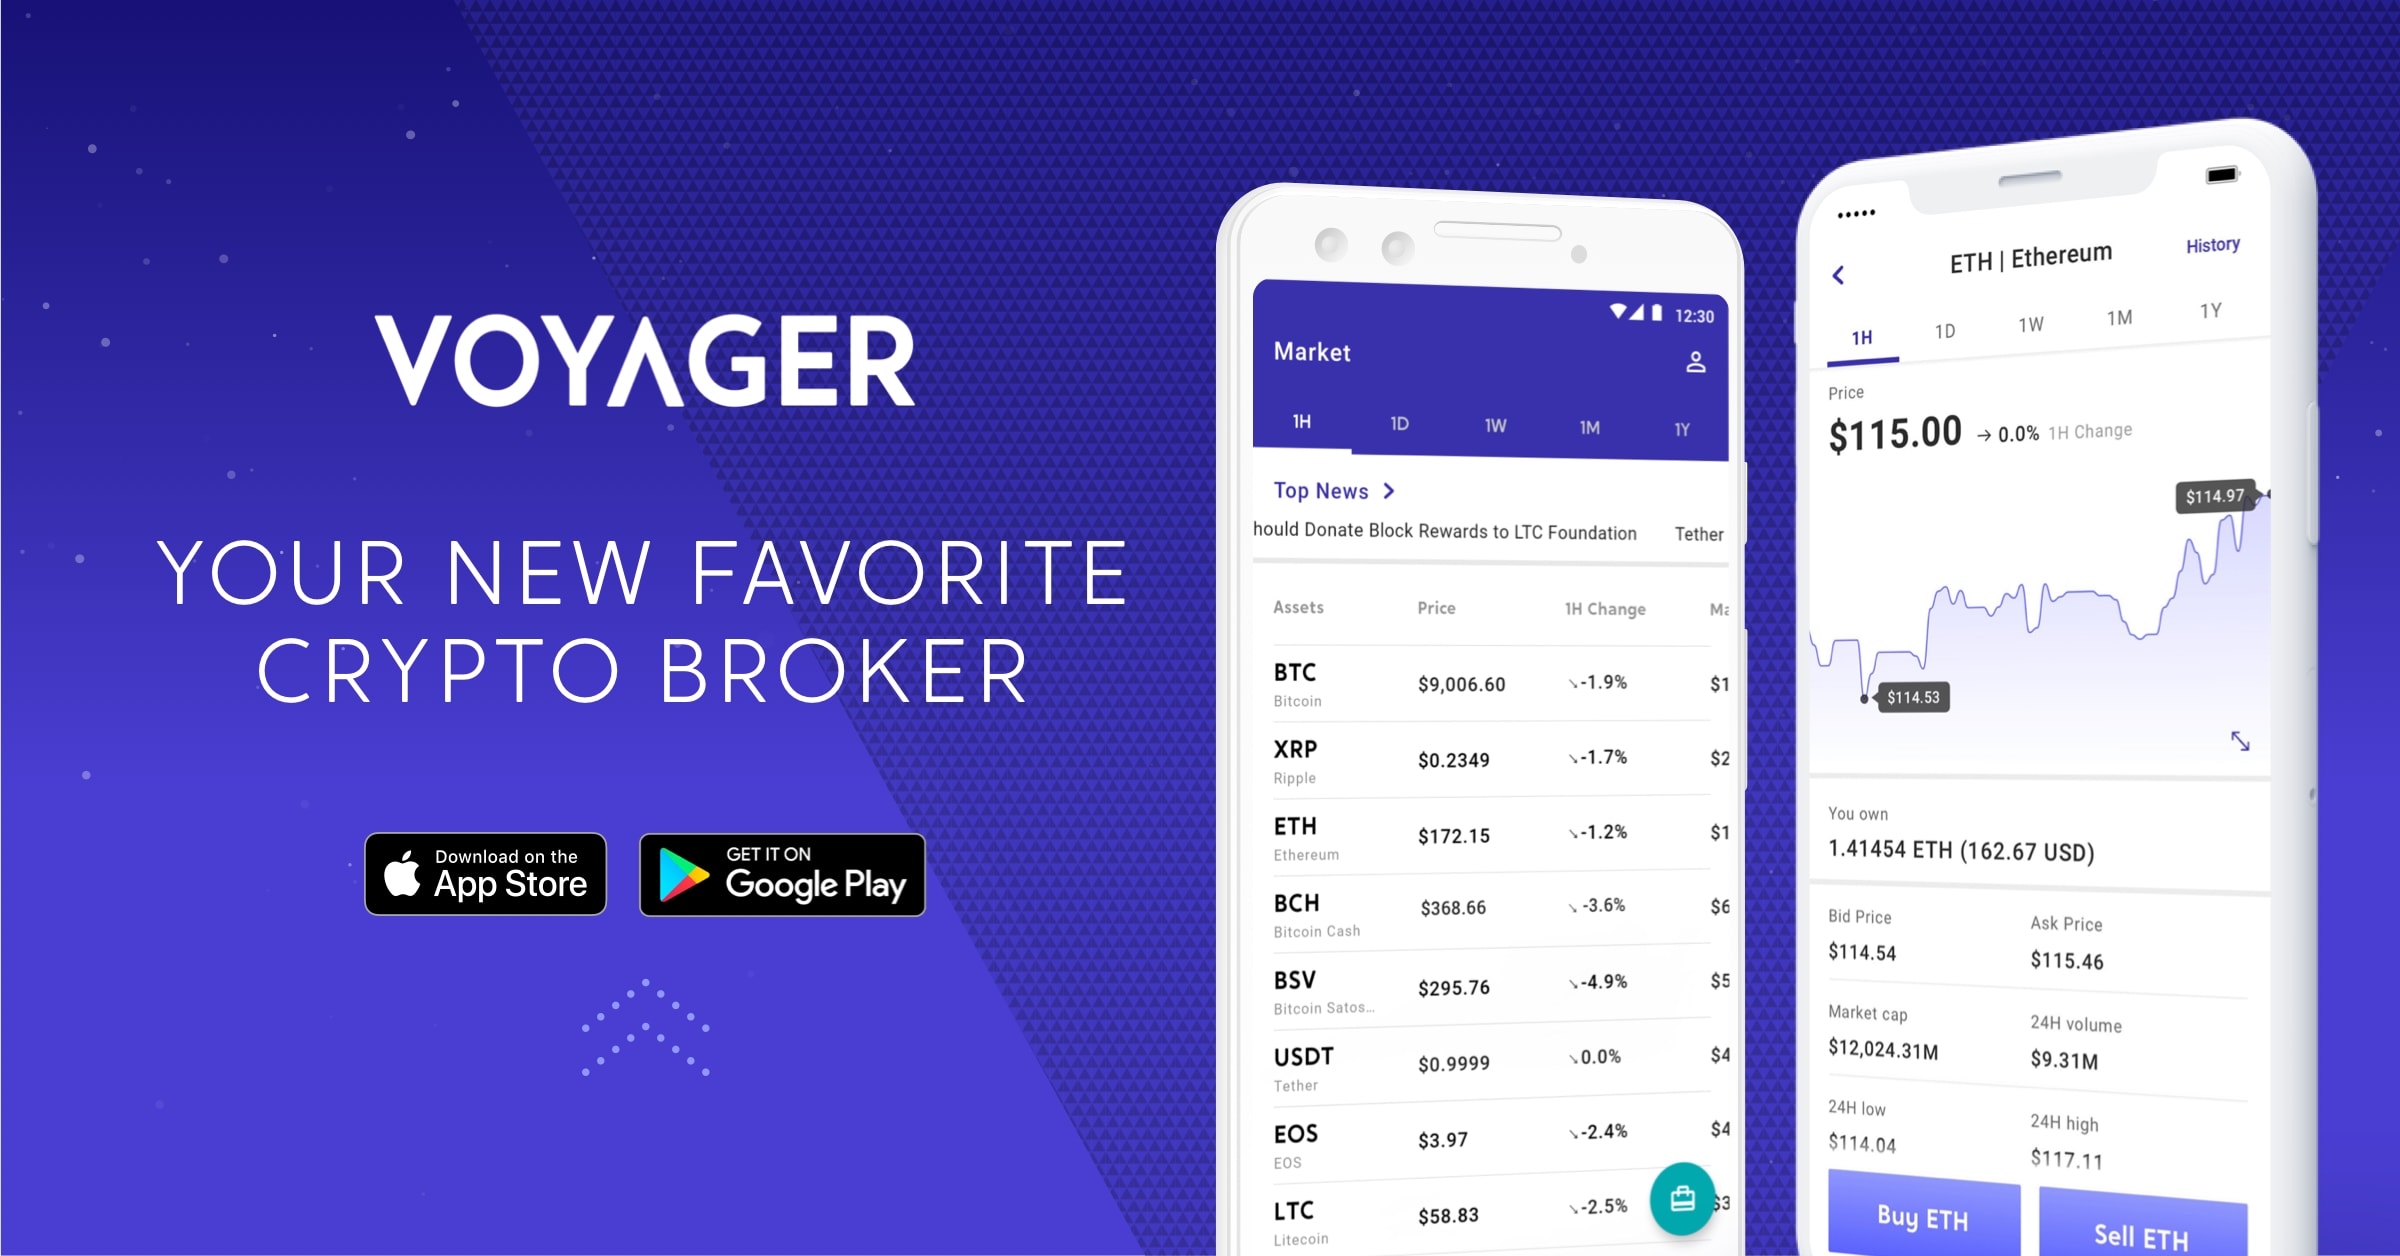 VYGR's Voyager Token Up 20.42% Today! | National Inflation ...